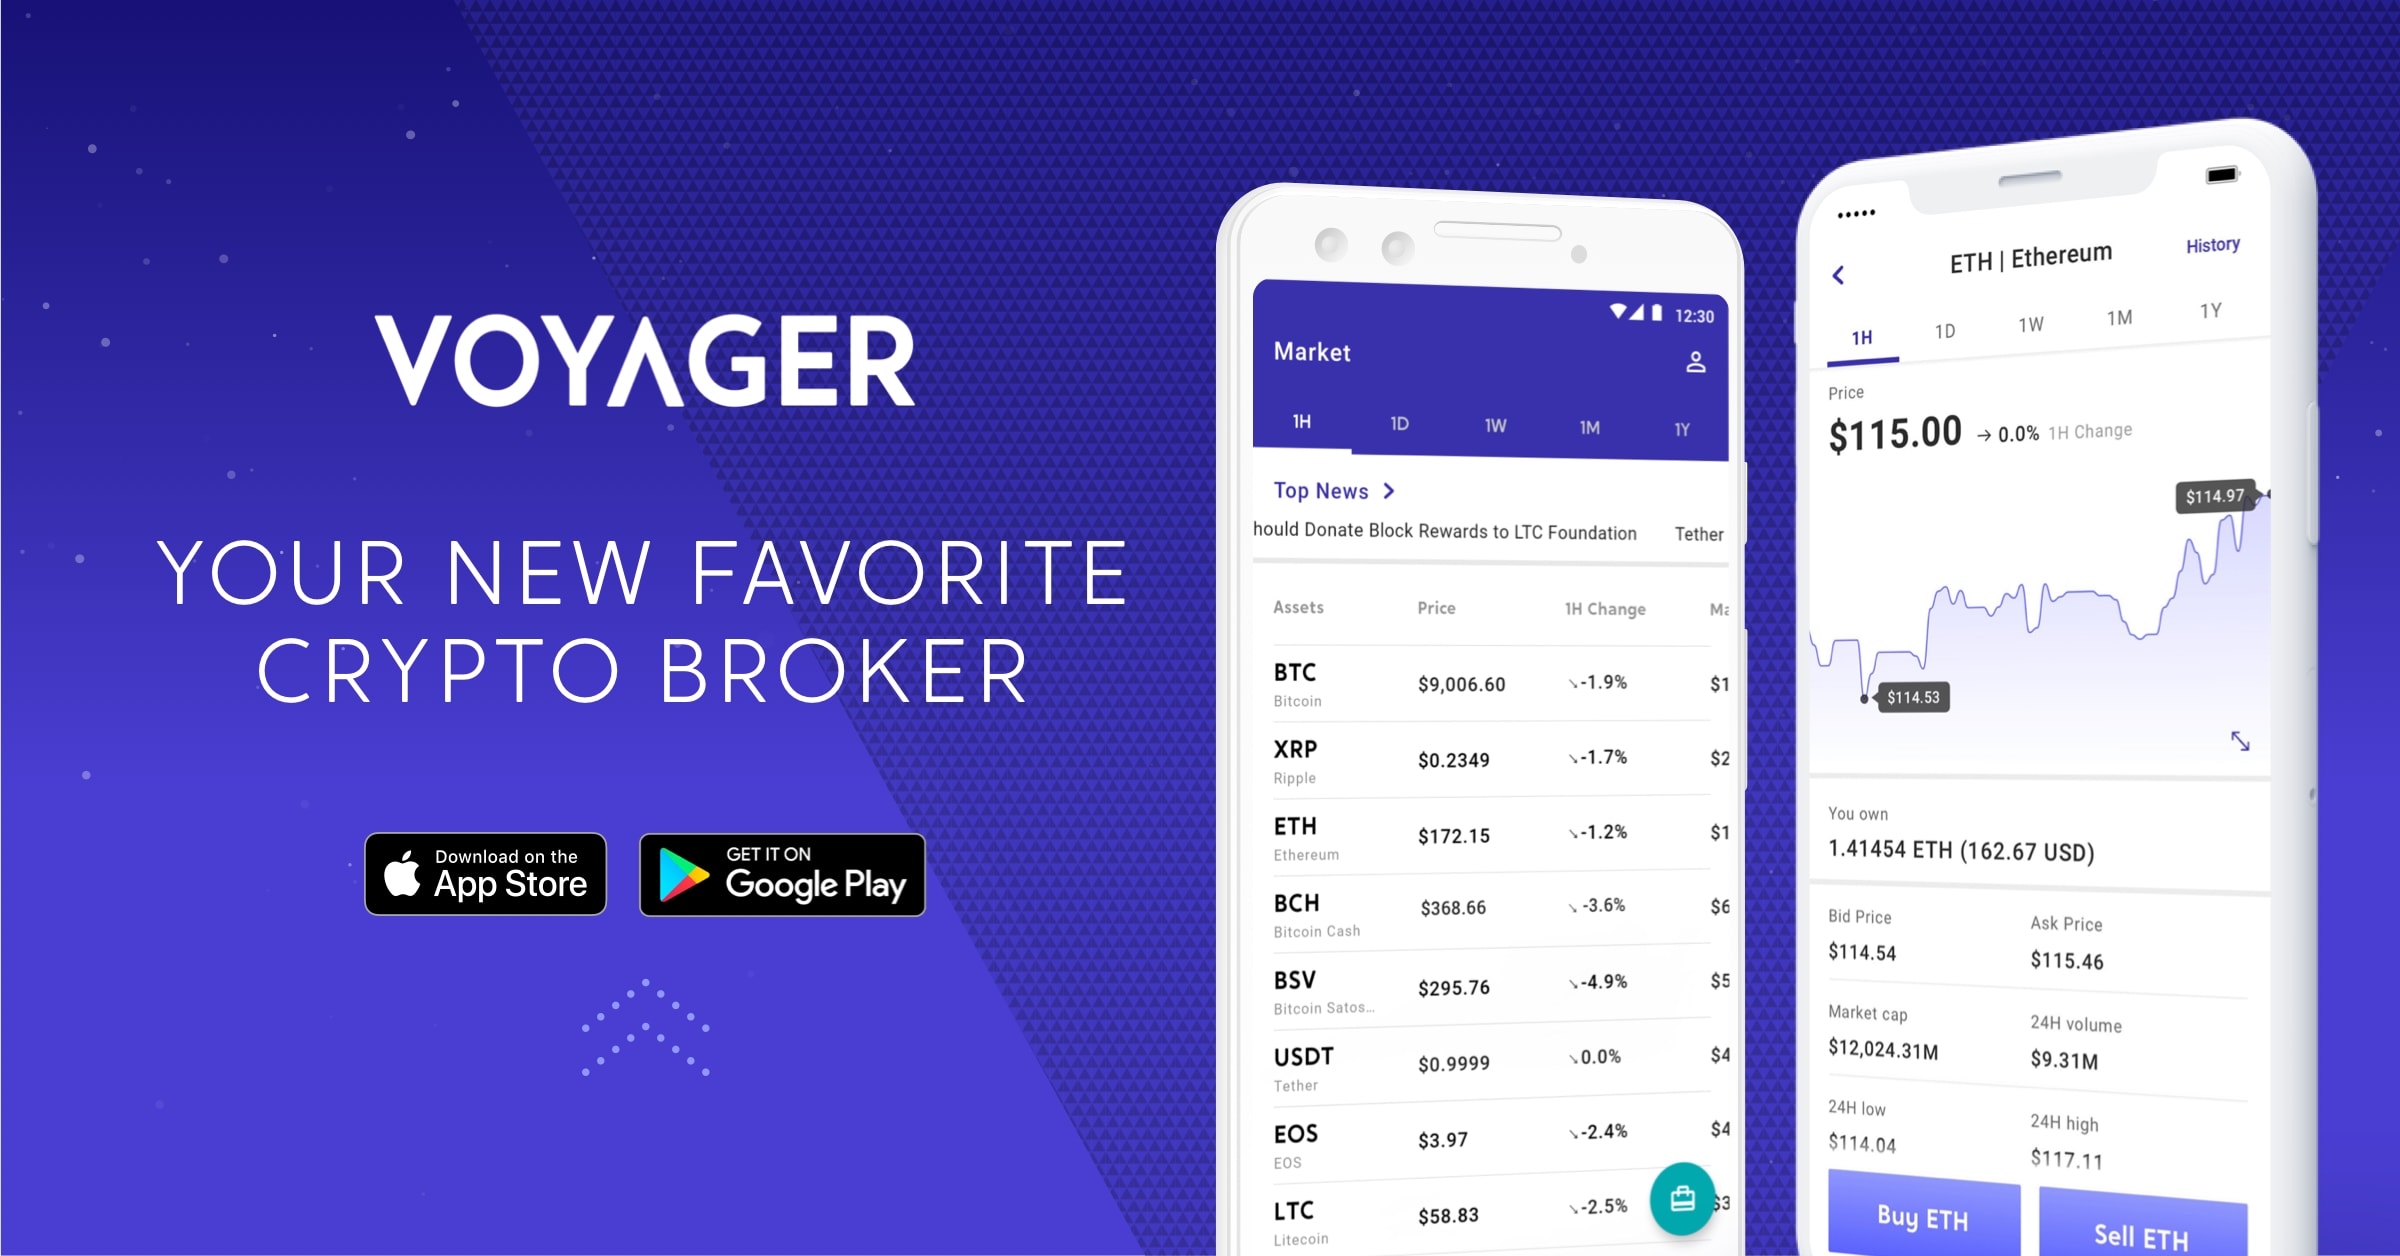 VYGR's Voyager Token Up 20.42% Today! | National Inflation ...